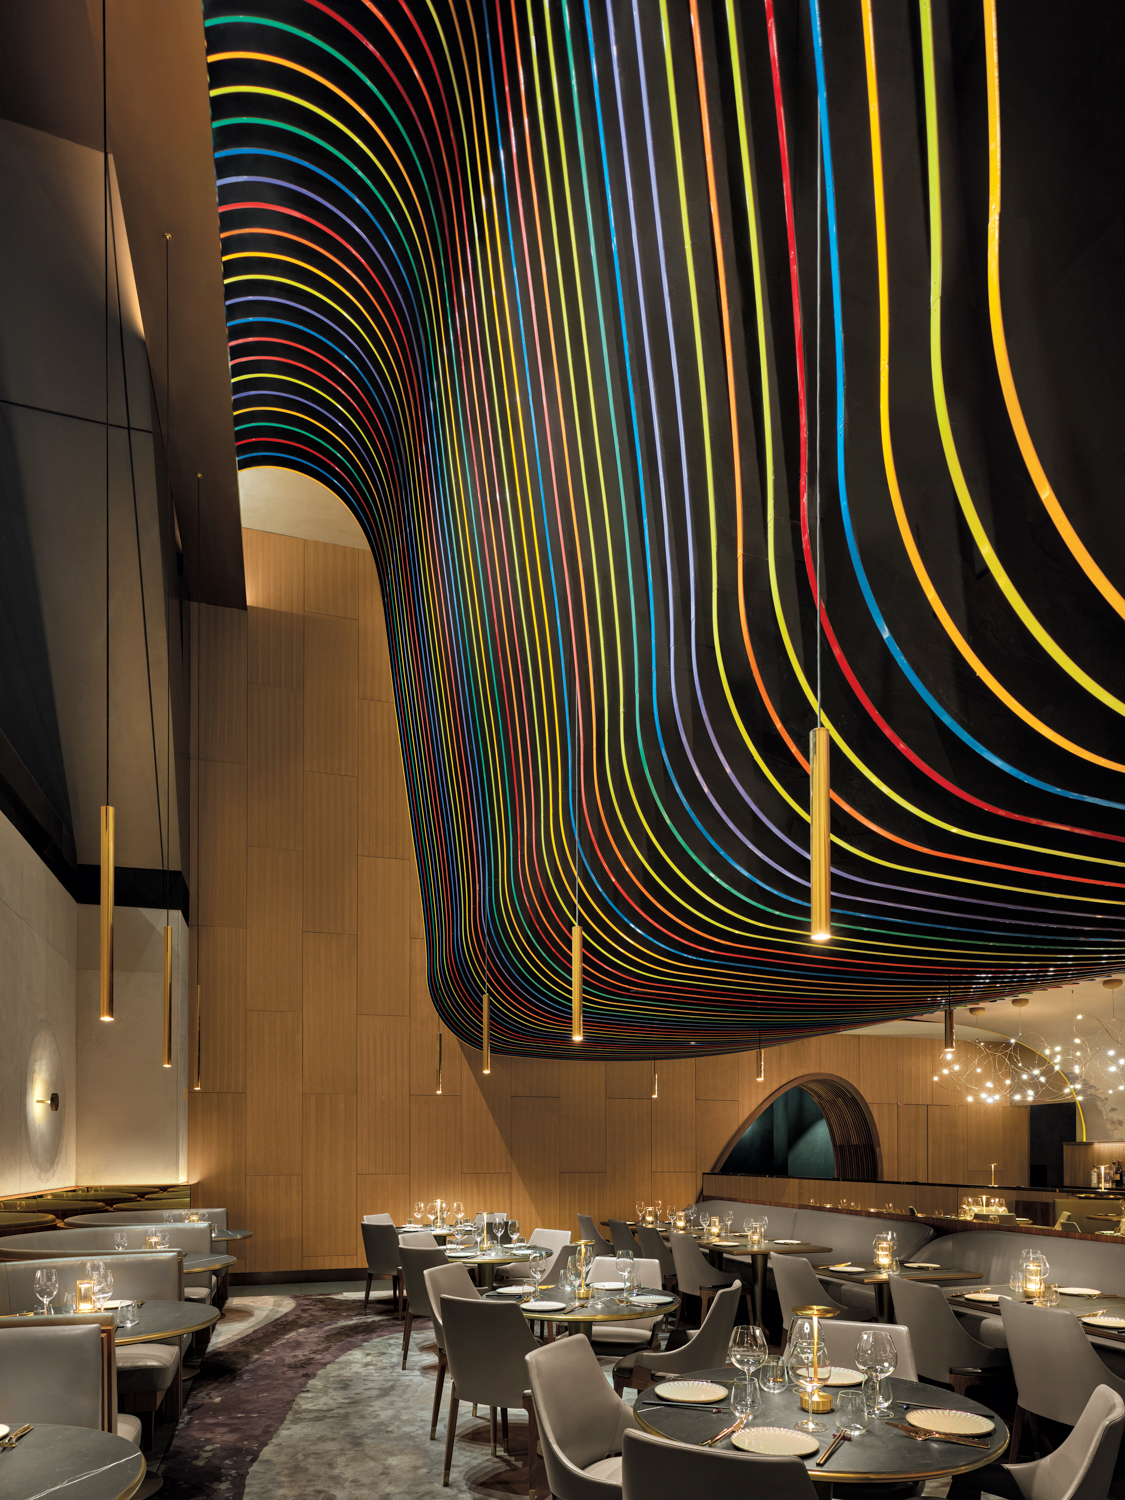 interior of 53 restaurant with curved ceiling with rainbow wave inserts